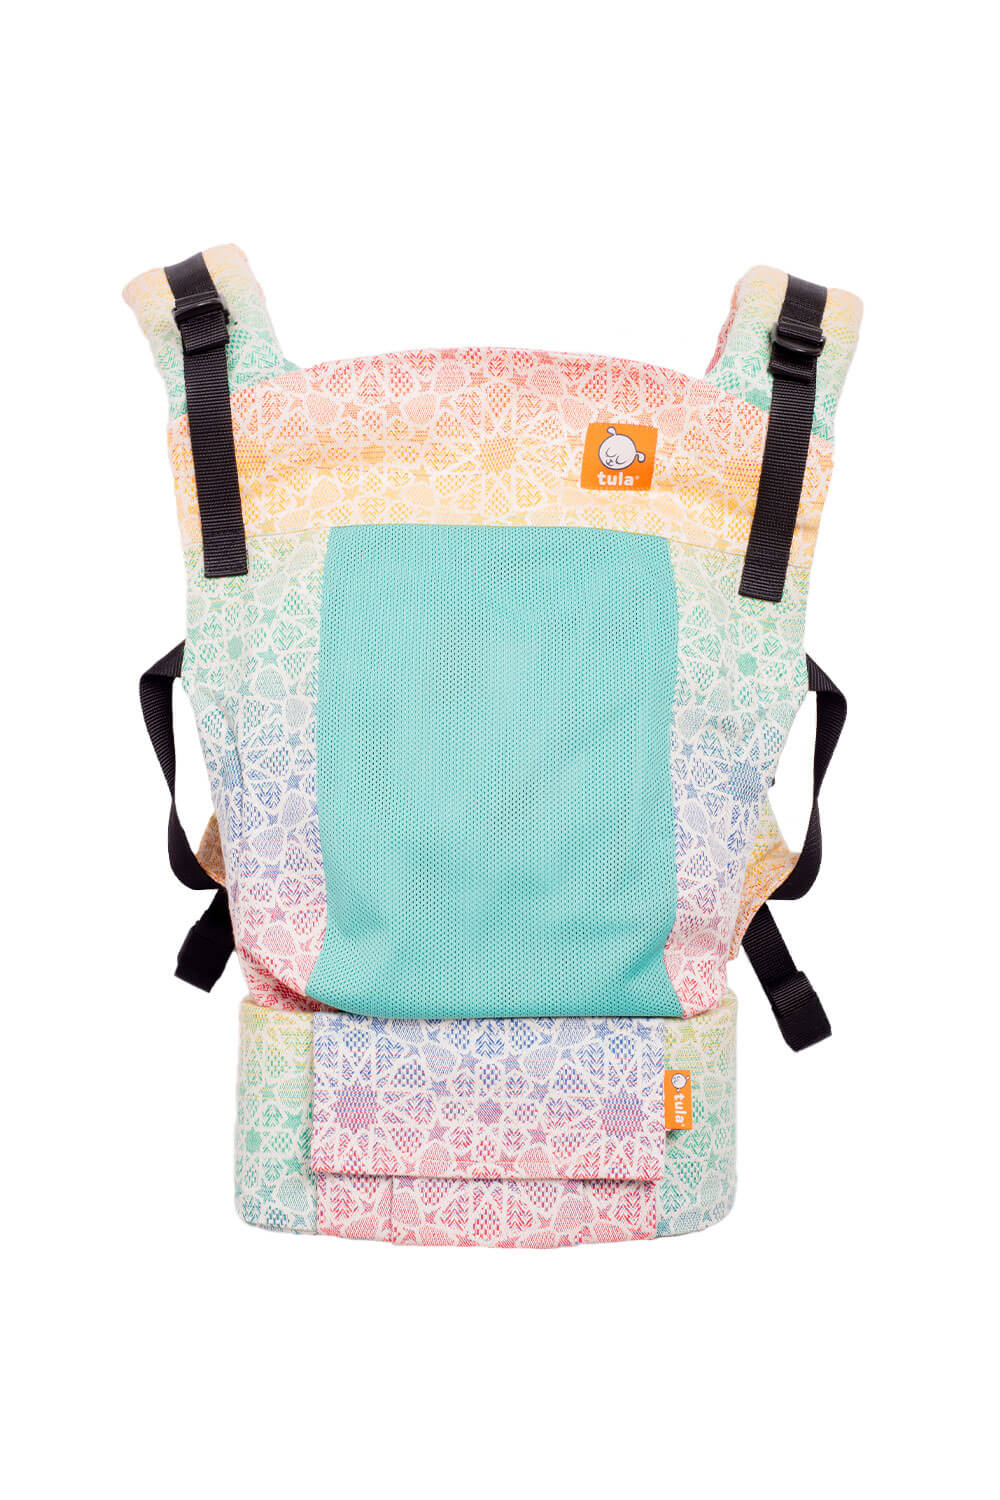 Coast Andaluz Rainbow - Signature Woven Free-to-Grow Mesh Baby Carrier